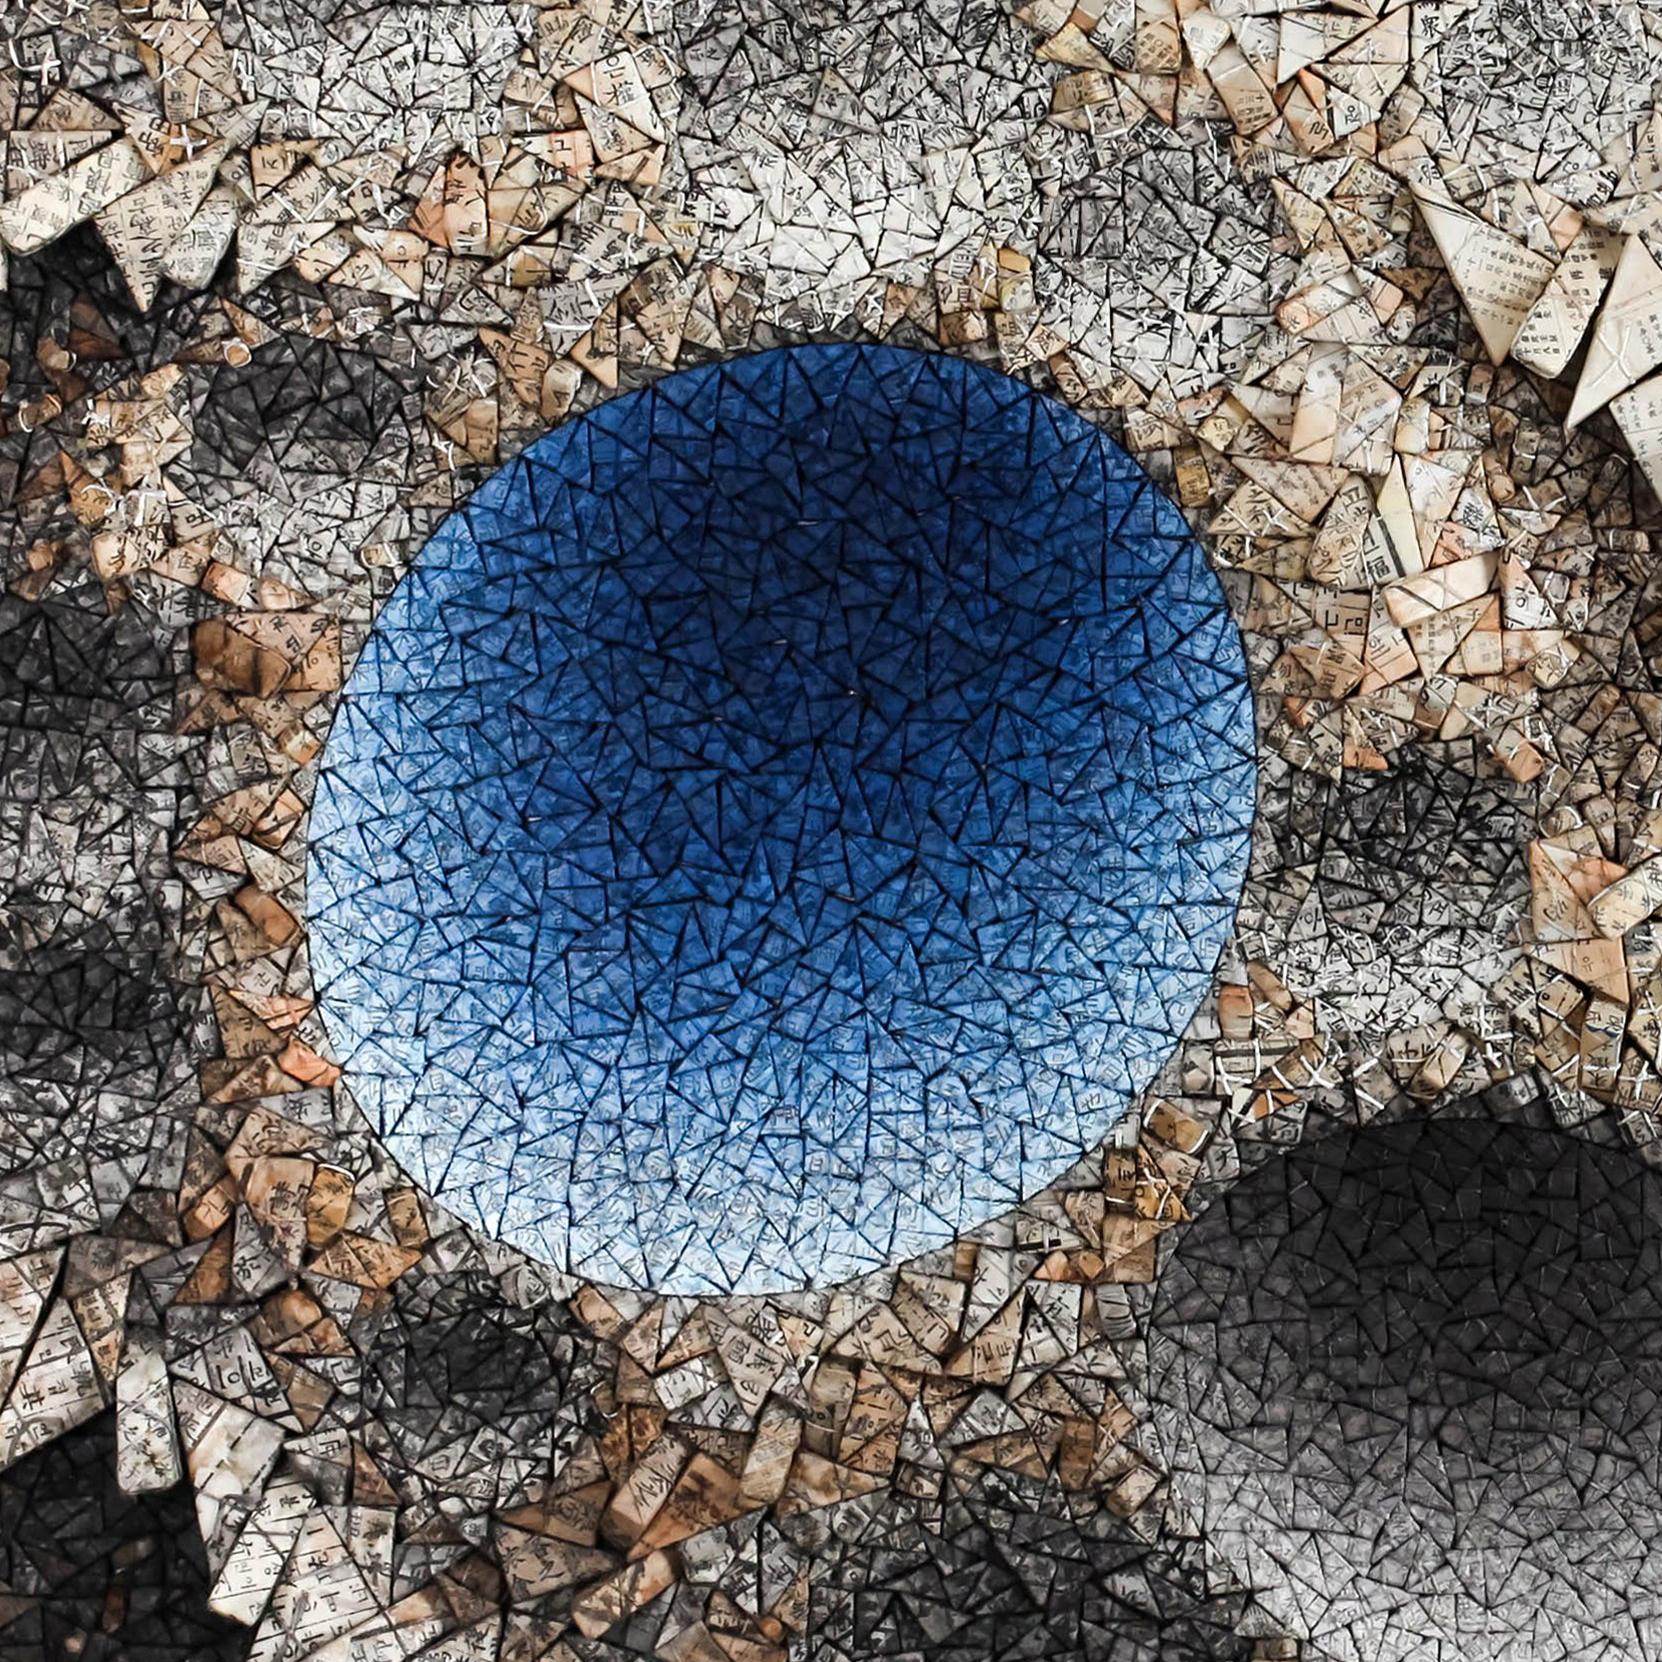 Chun Kwang Young
Aggregation 14 - JA005 Blue, 2014
Mixed media with Korean mulberry paper
60 x 76.8 inches
152 x 195 cm

Chun Kwang Young began his career as a painter. He began to experiment with paper sculpture in the mid-1990s and over time his